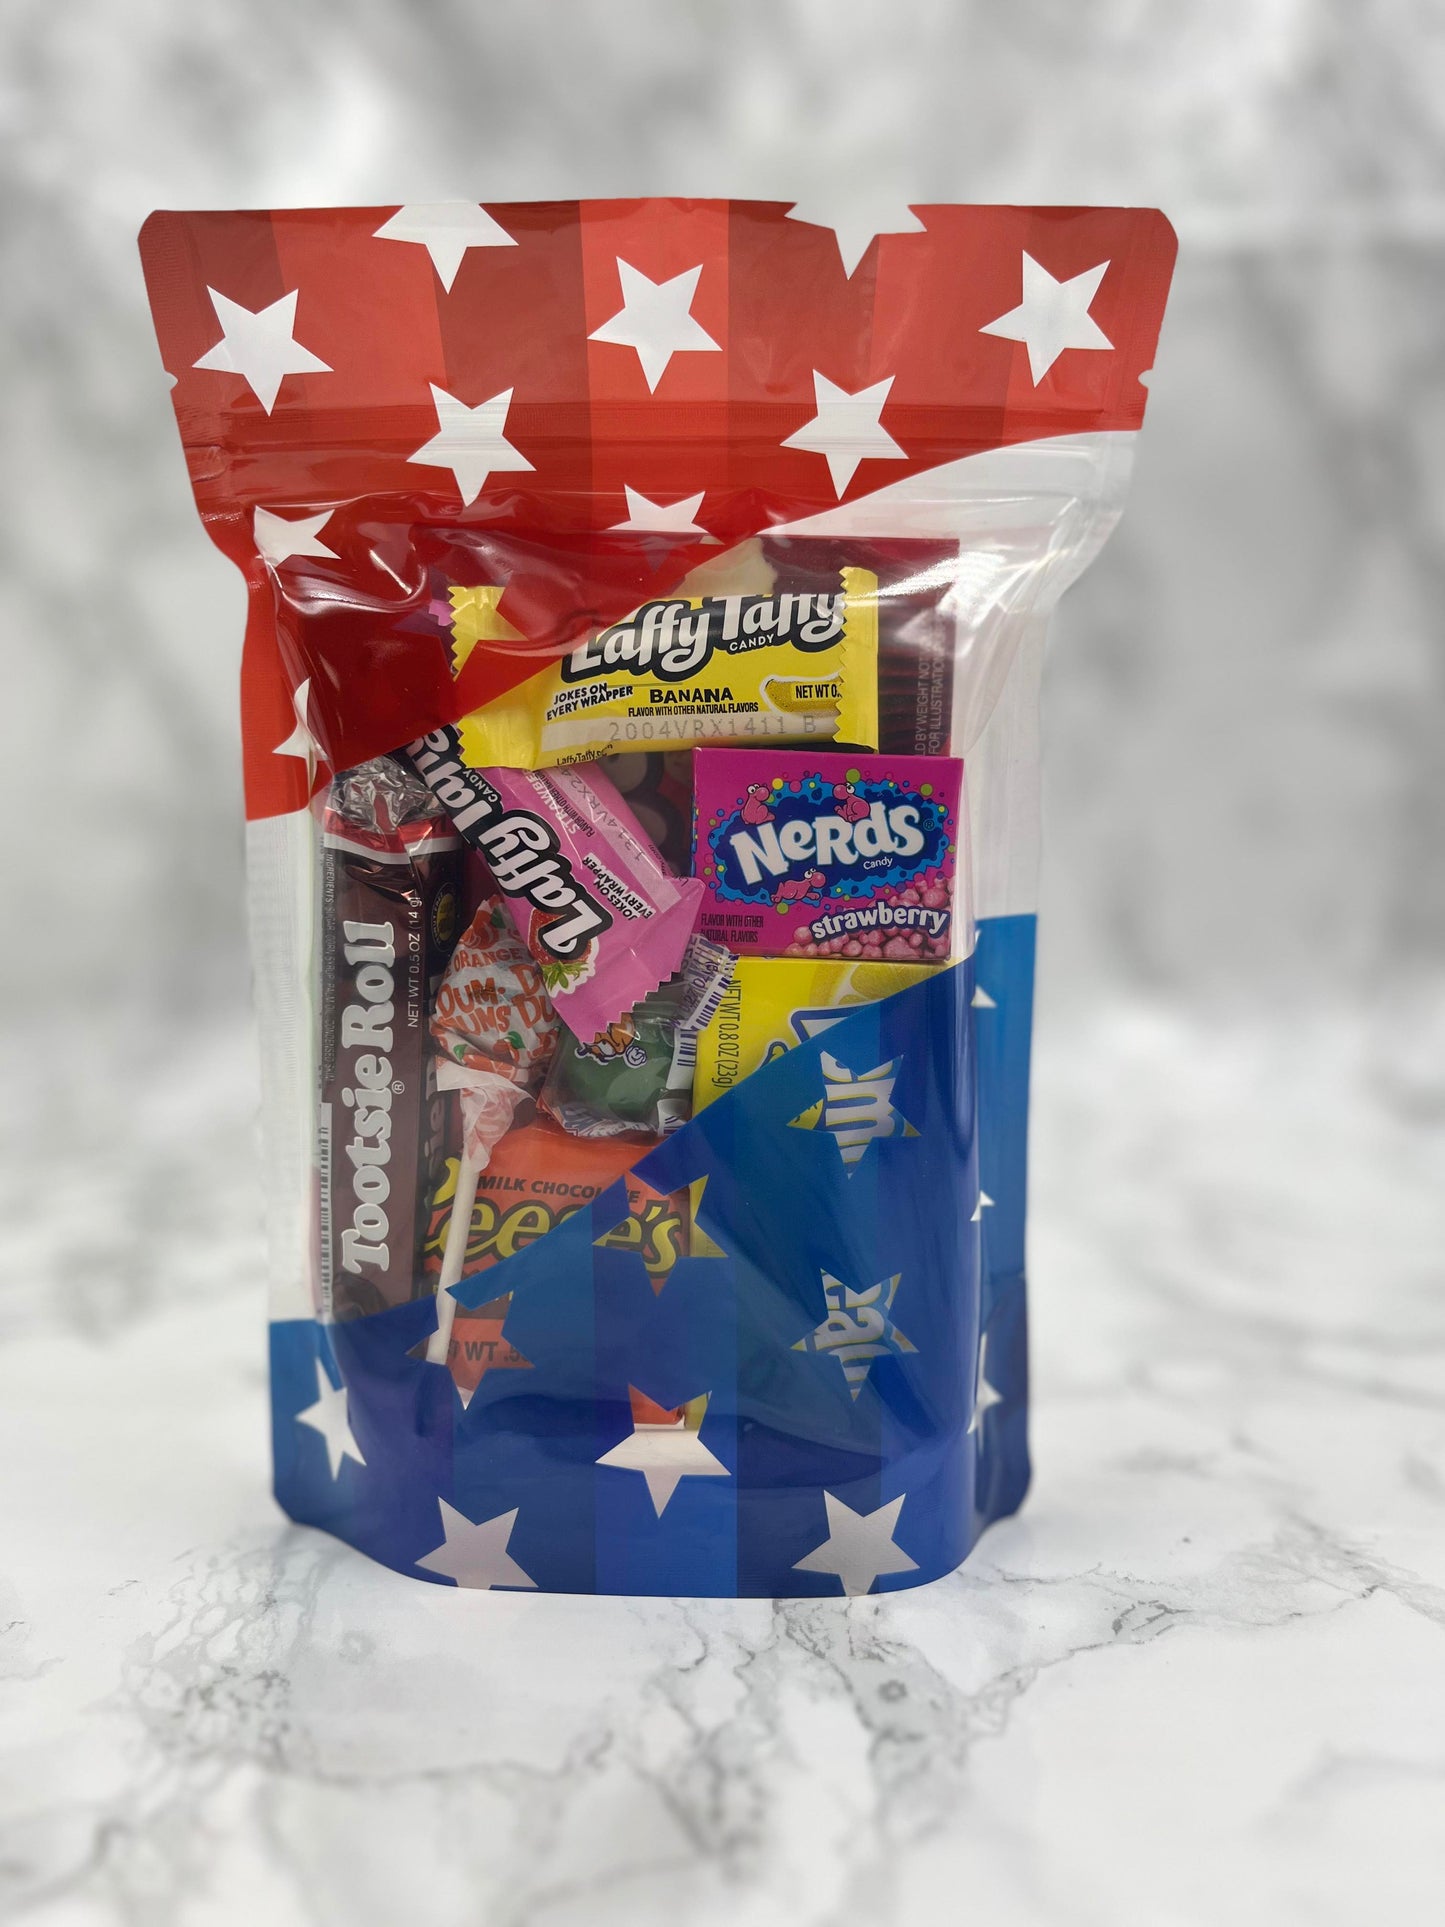 USA American Candy Bag Full Of All Your Favourite Sweets- Choose Your Theatre Box!